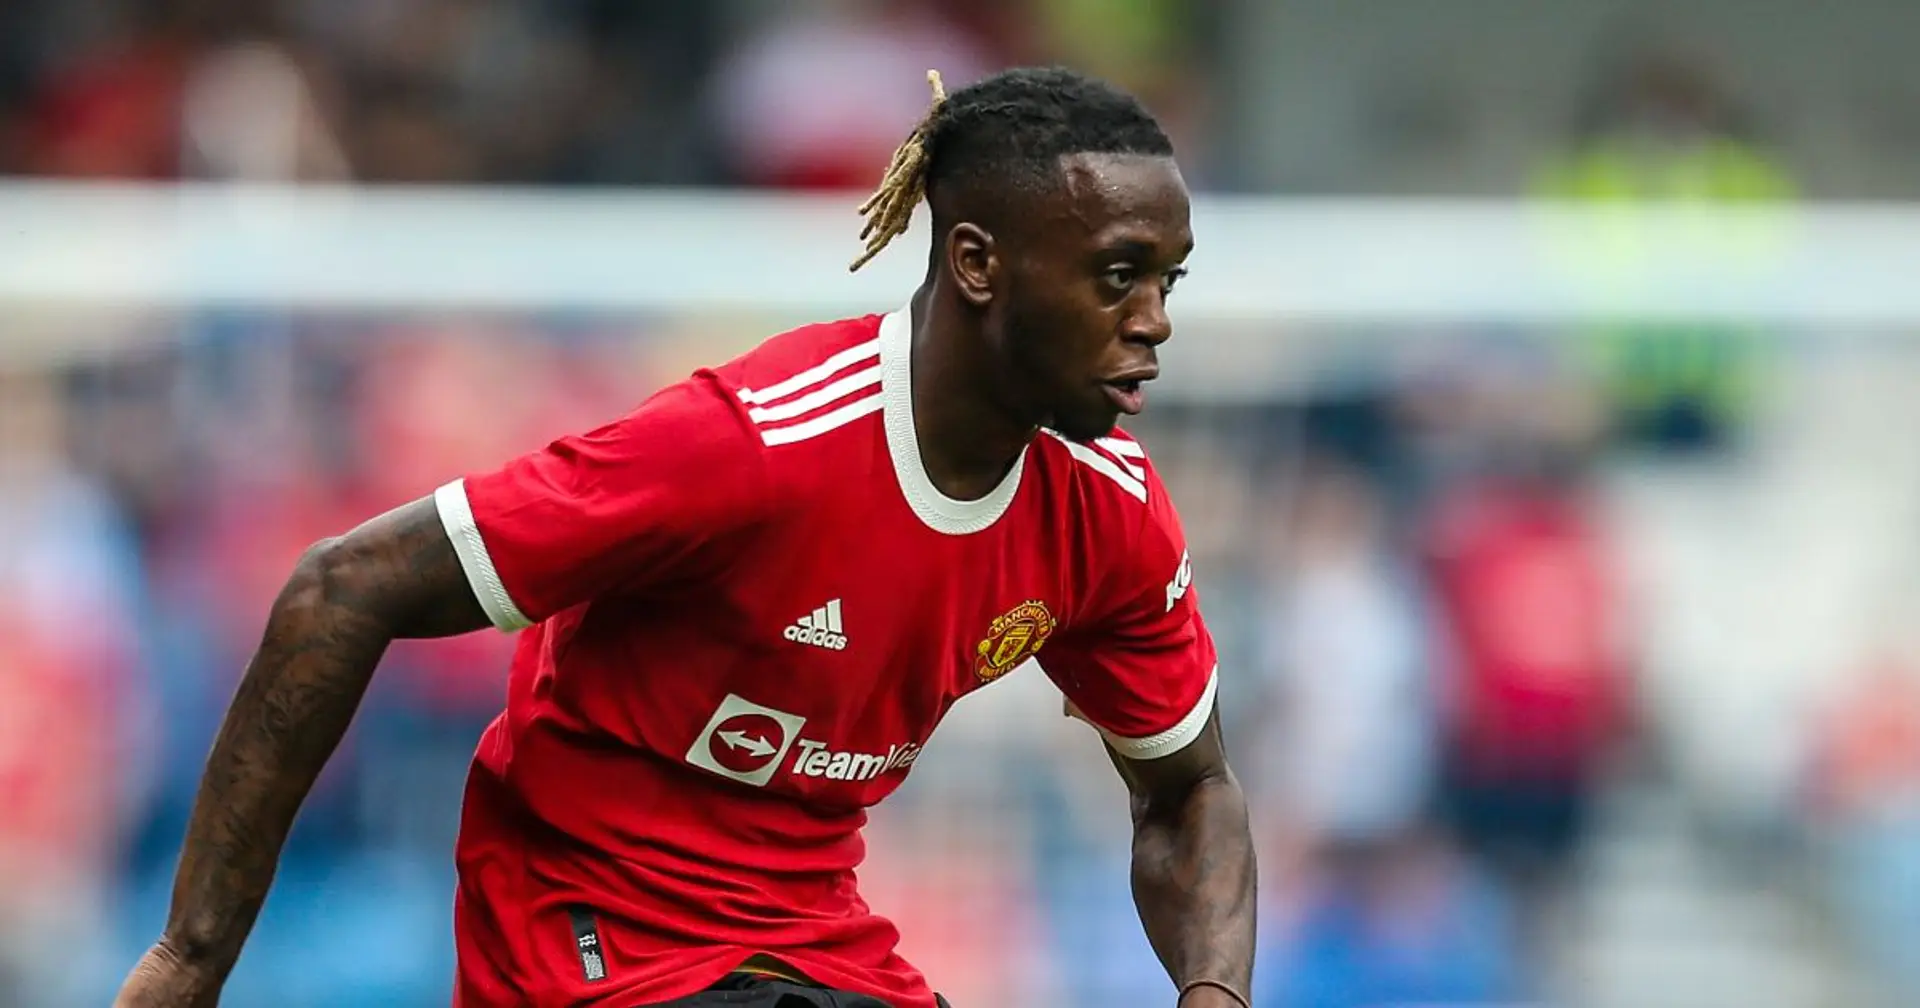 Man United 'lose patience' with Wan-Bissaka & 3 more under-radar stories at Old Trafford today